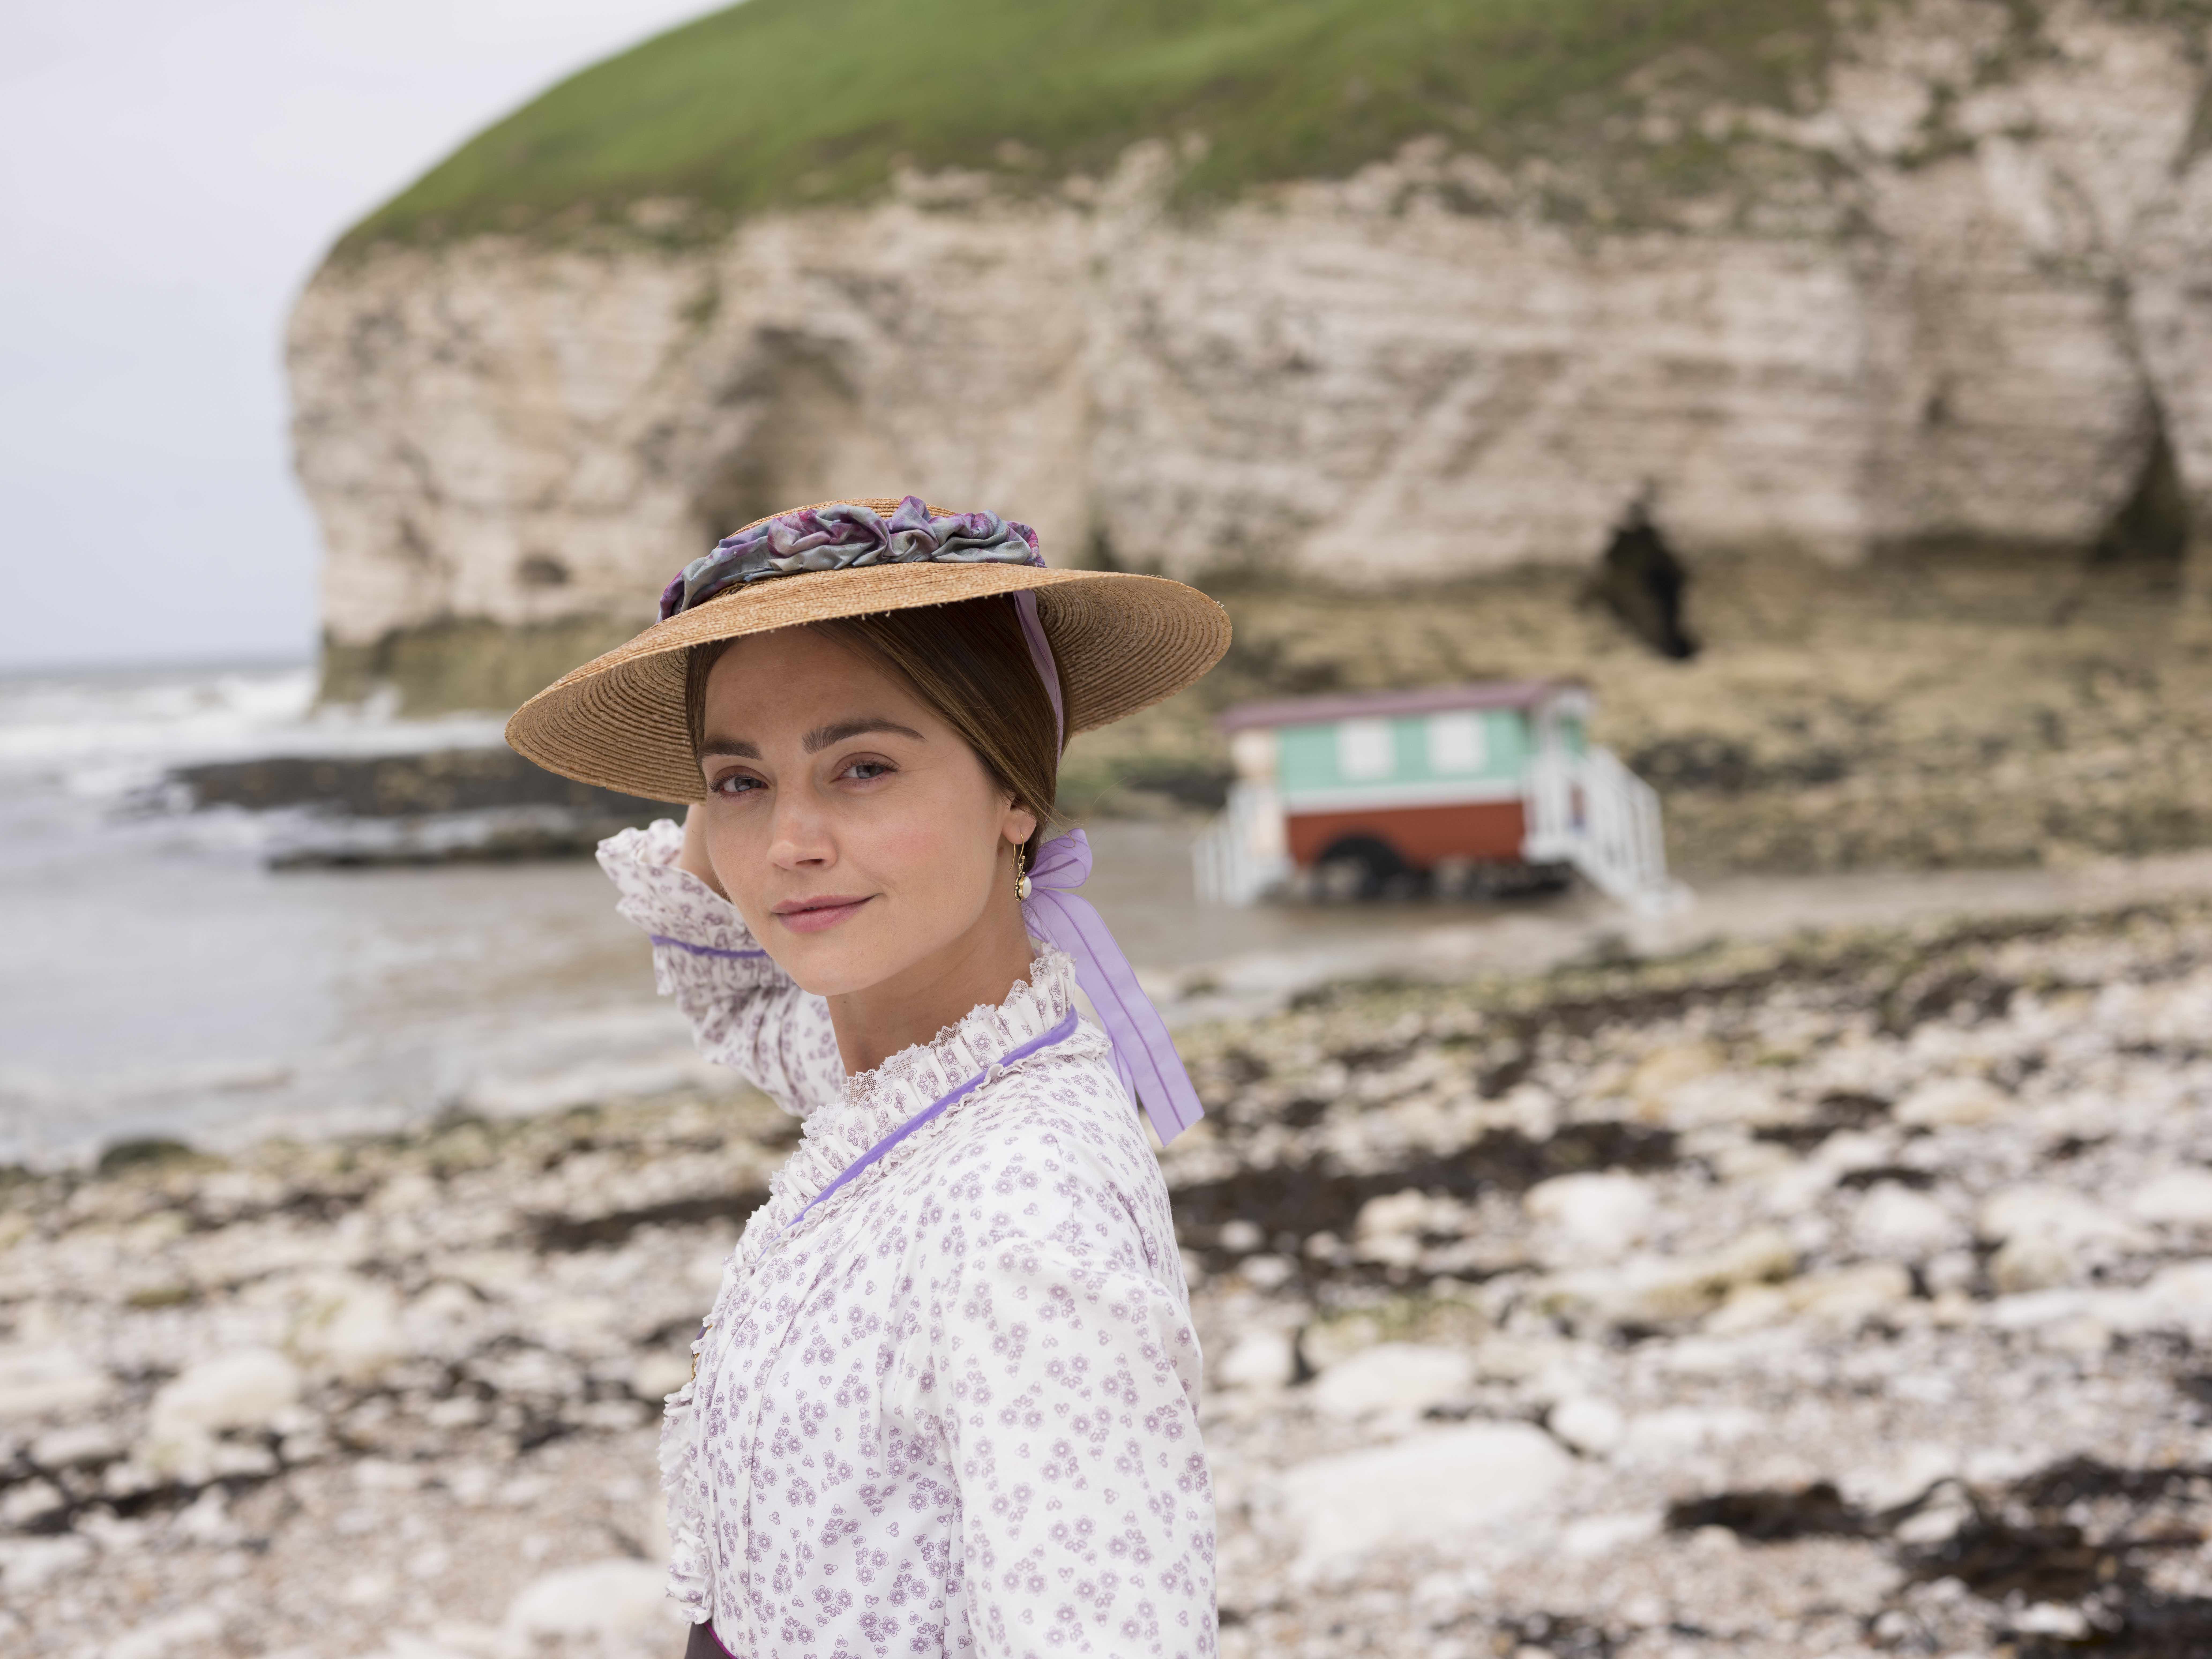 Jenna Coleman as Queen Victoria, wearing a hat and standing on the beach, in 'Victoria' Season 3